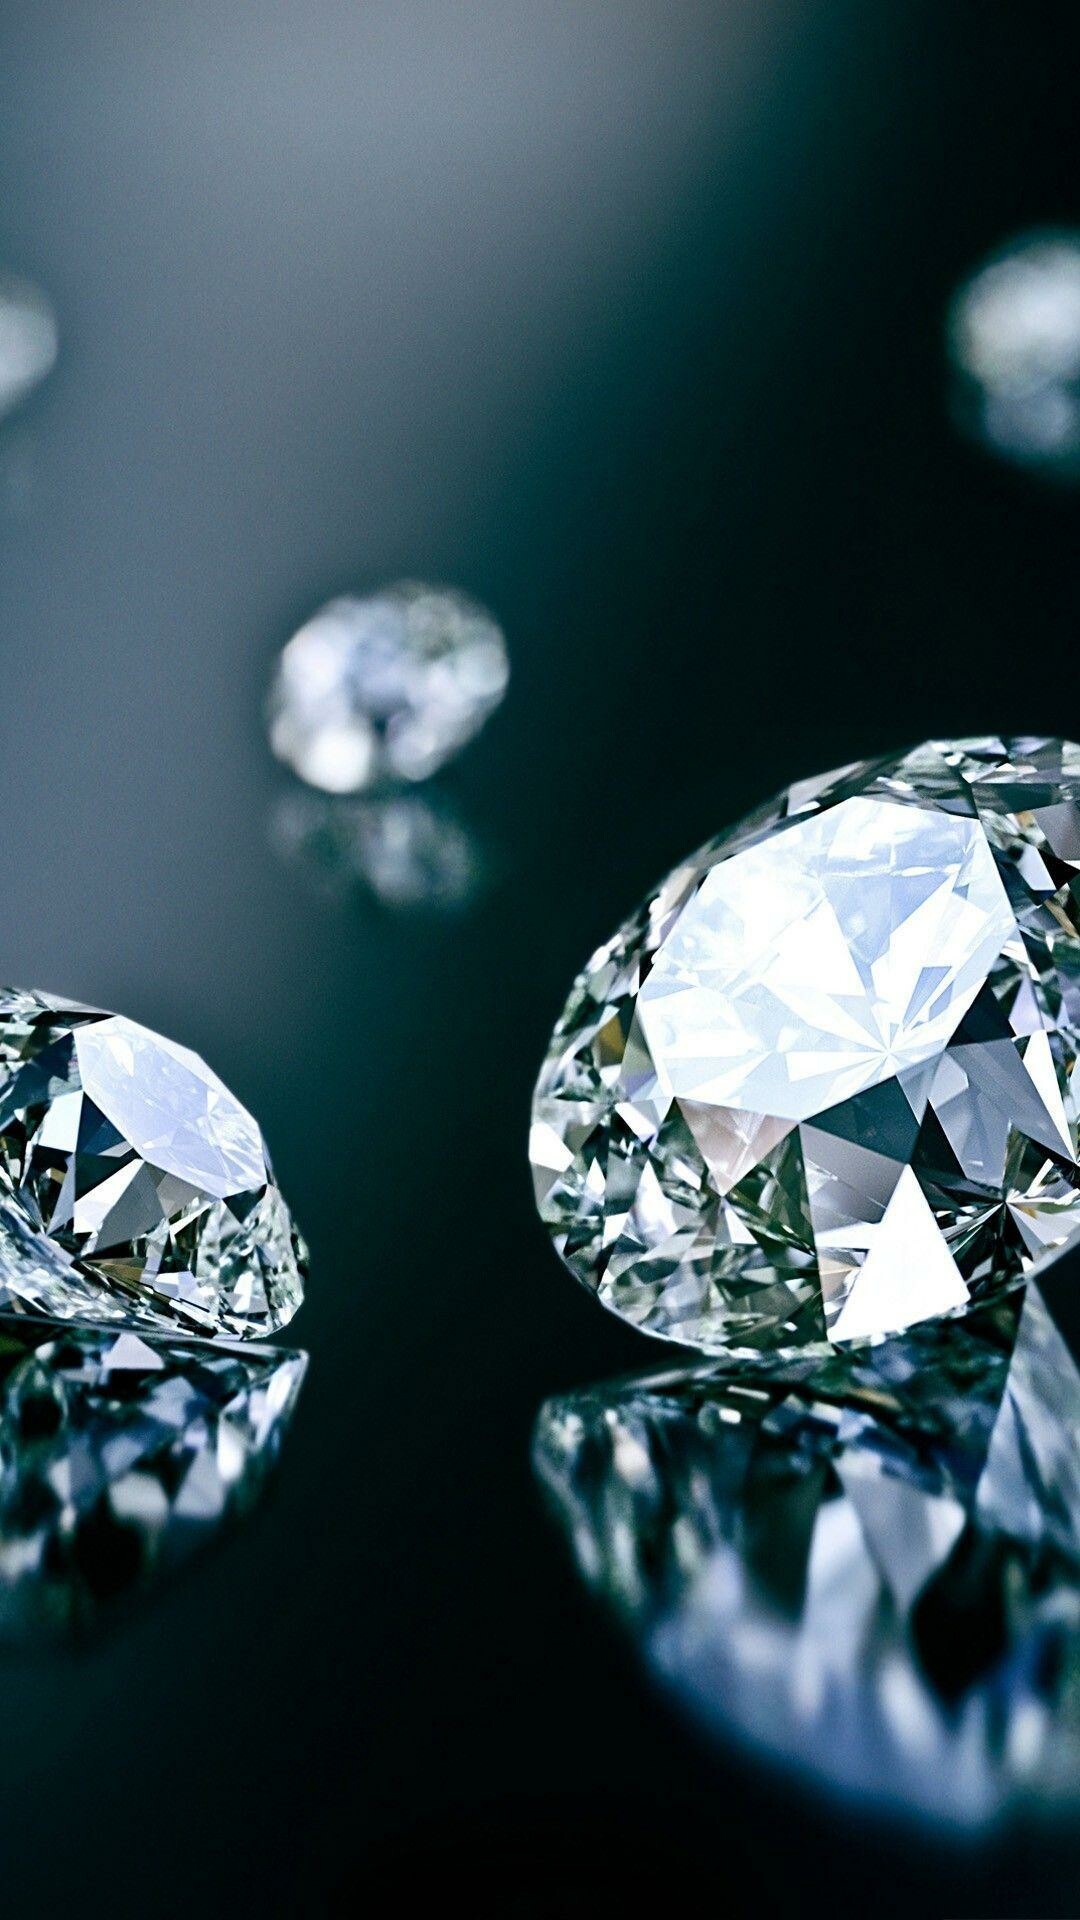 Jewels: Diamond, A solid form of pure carbon with its atoms arranged in a crystal. 1080x1920 Full HD Wallpaper.